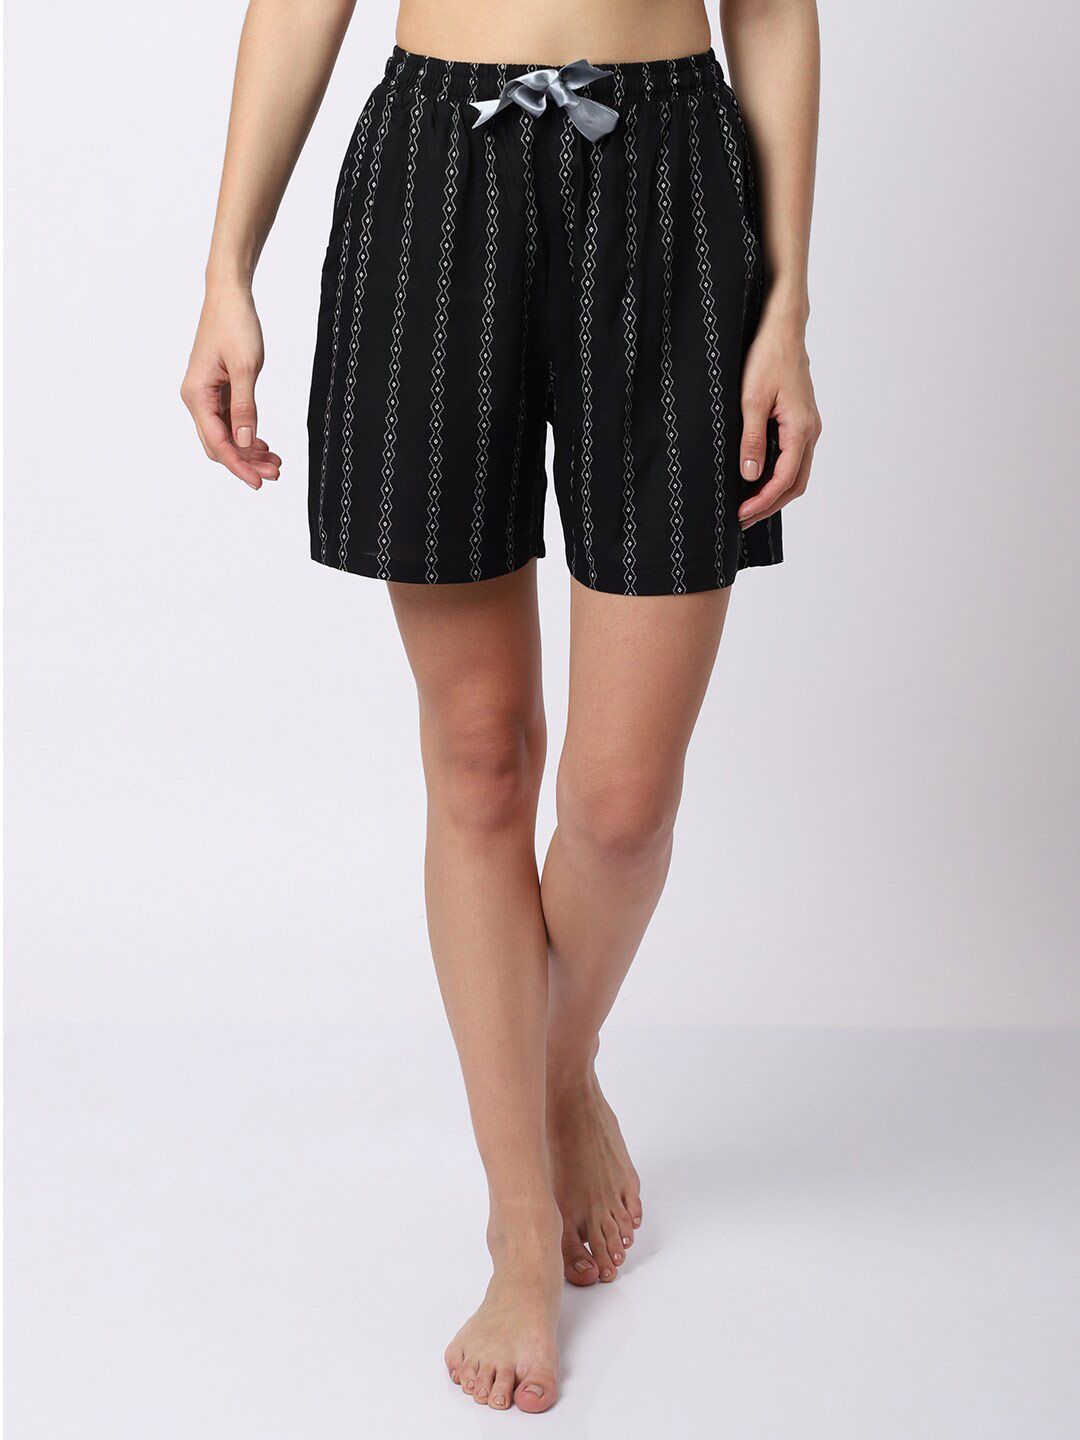 Claura Women Black & White Striped Lounge Shorts Price in India